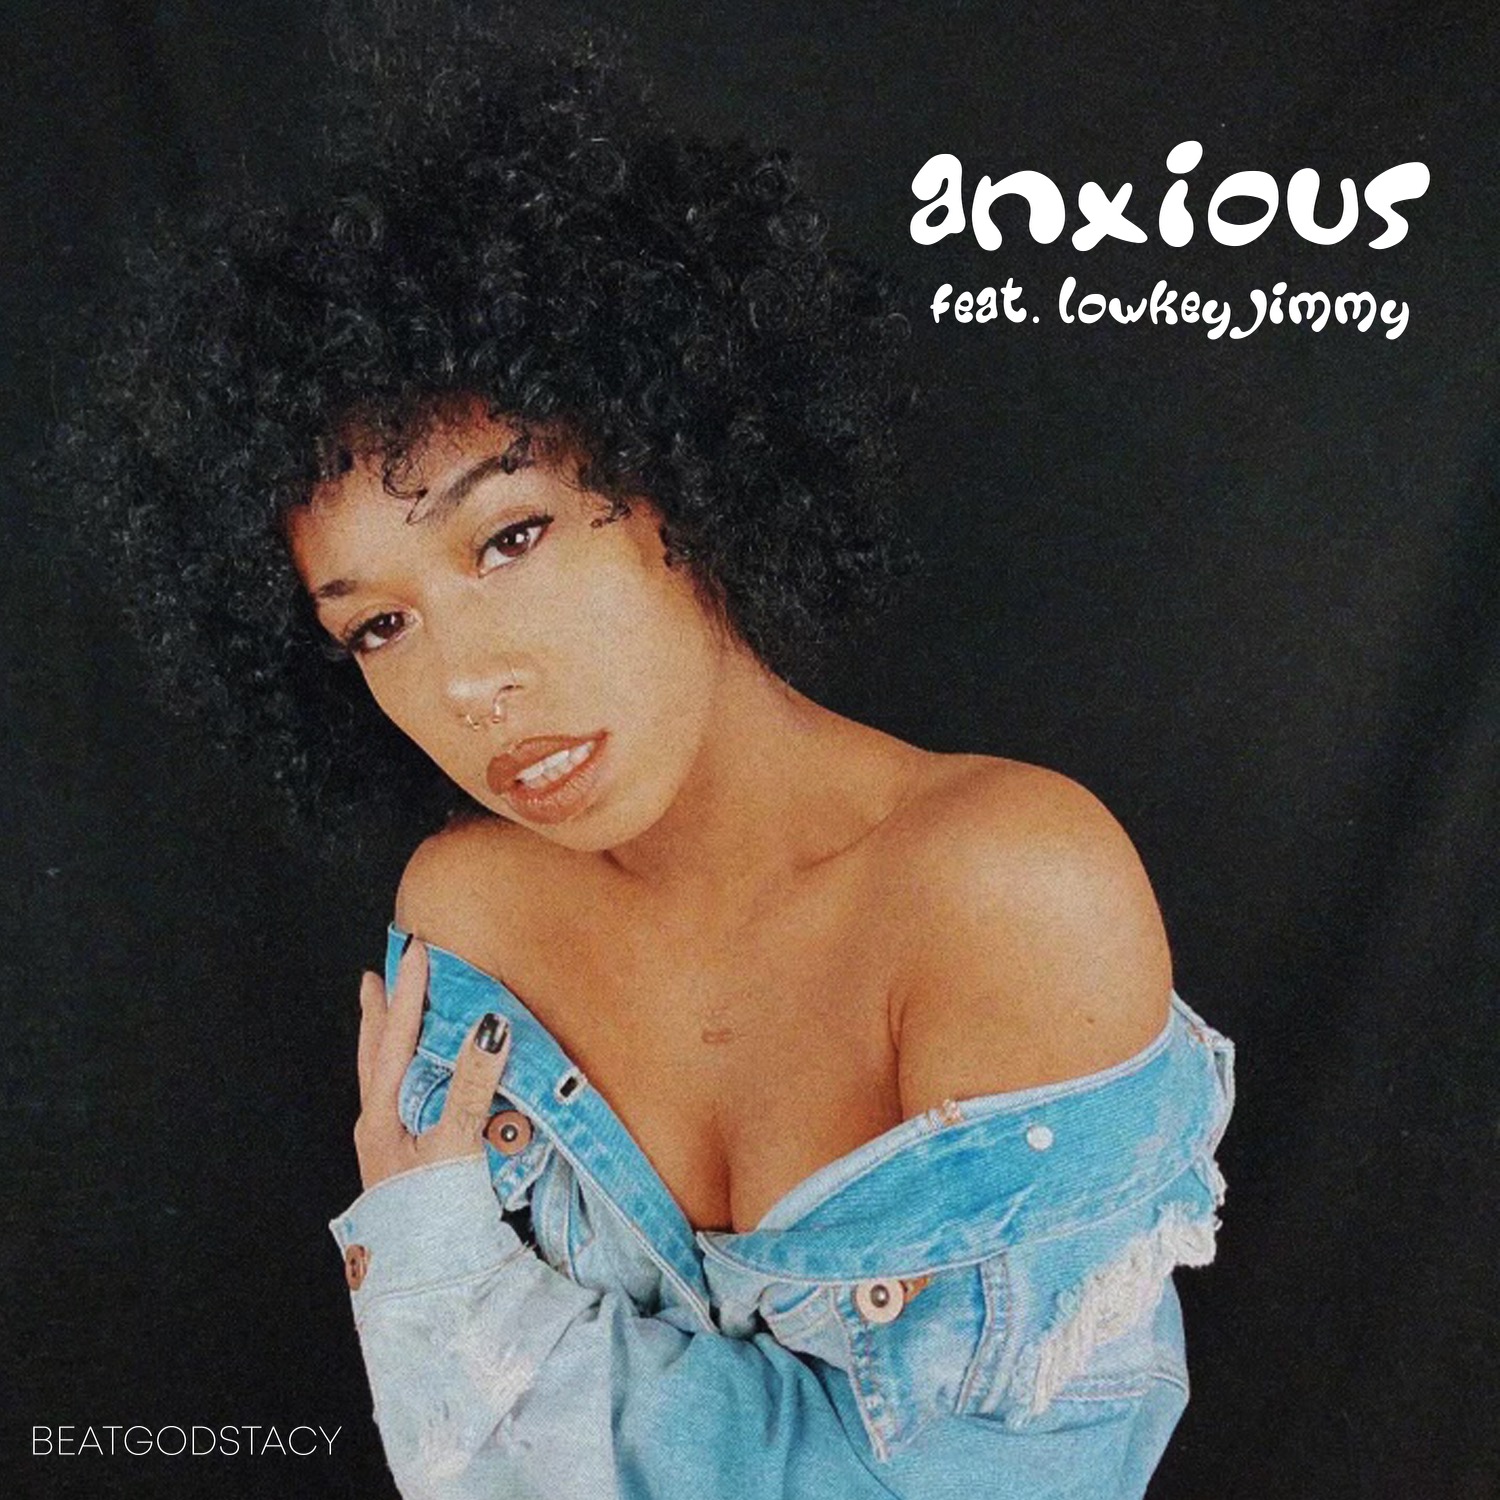 ‘BeatGodStacy’ releases his new Drum N Bass single “Anxious For You” featuring rapper ‘LowKey Jimmy’.